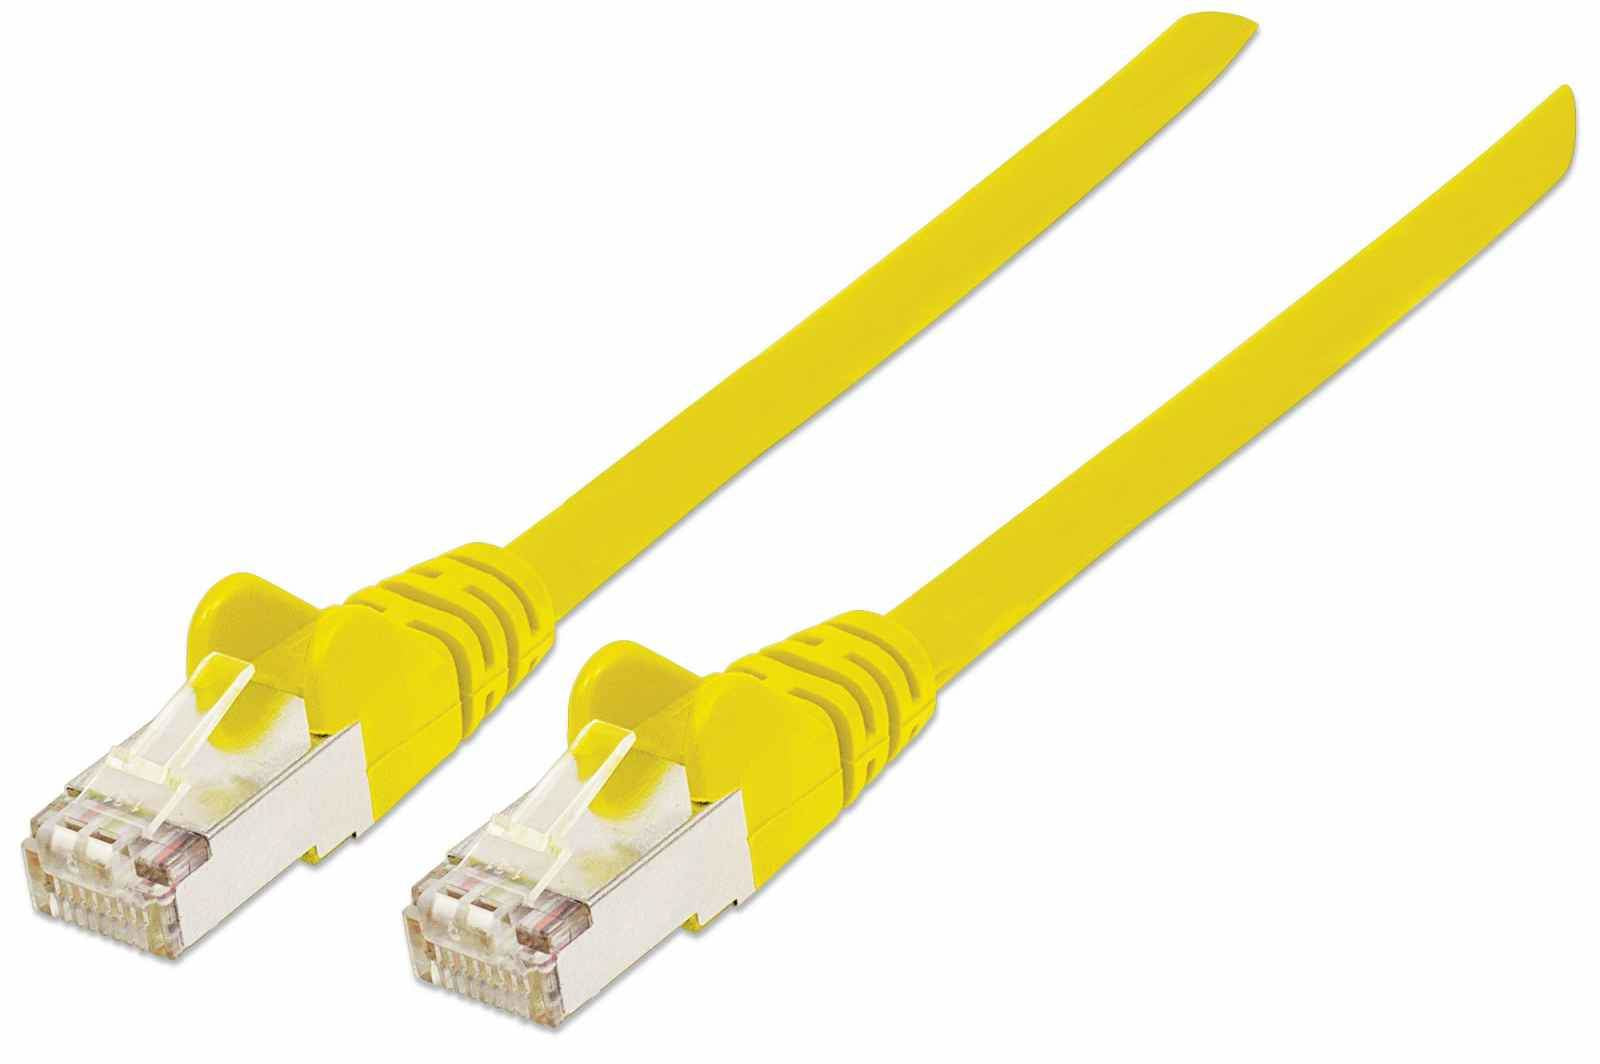 Intellinet Network Patch Cable, Cat7 Cable/Cat6A Plugs, 1m, Yellow, Copper, S/FTP, LSOH / LSZH, PVC, RJ45, Gold Plated Contacts, Snagless, Booted, Lifetime Warranty, Polybag